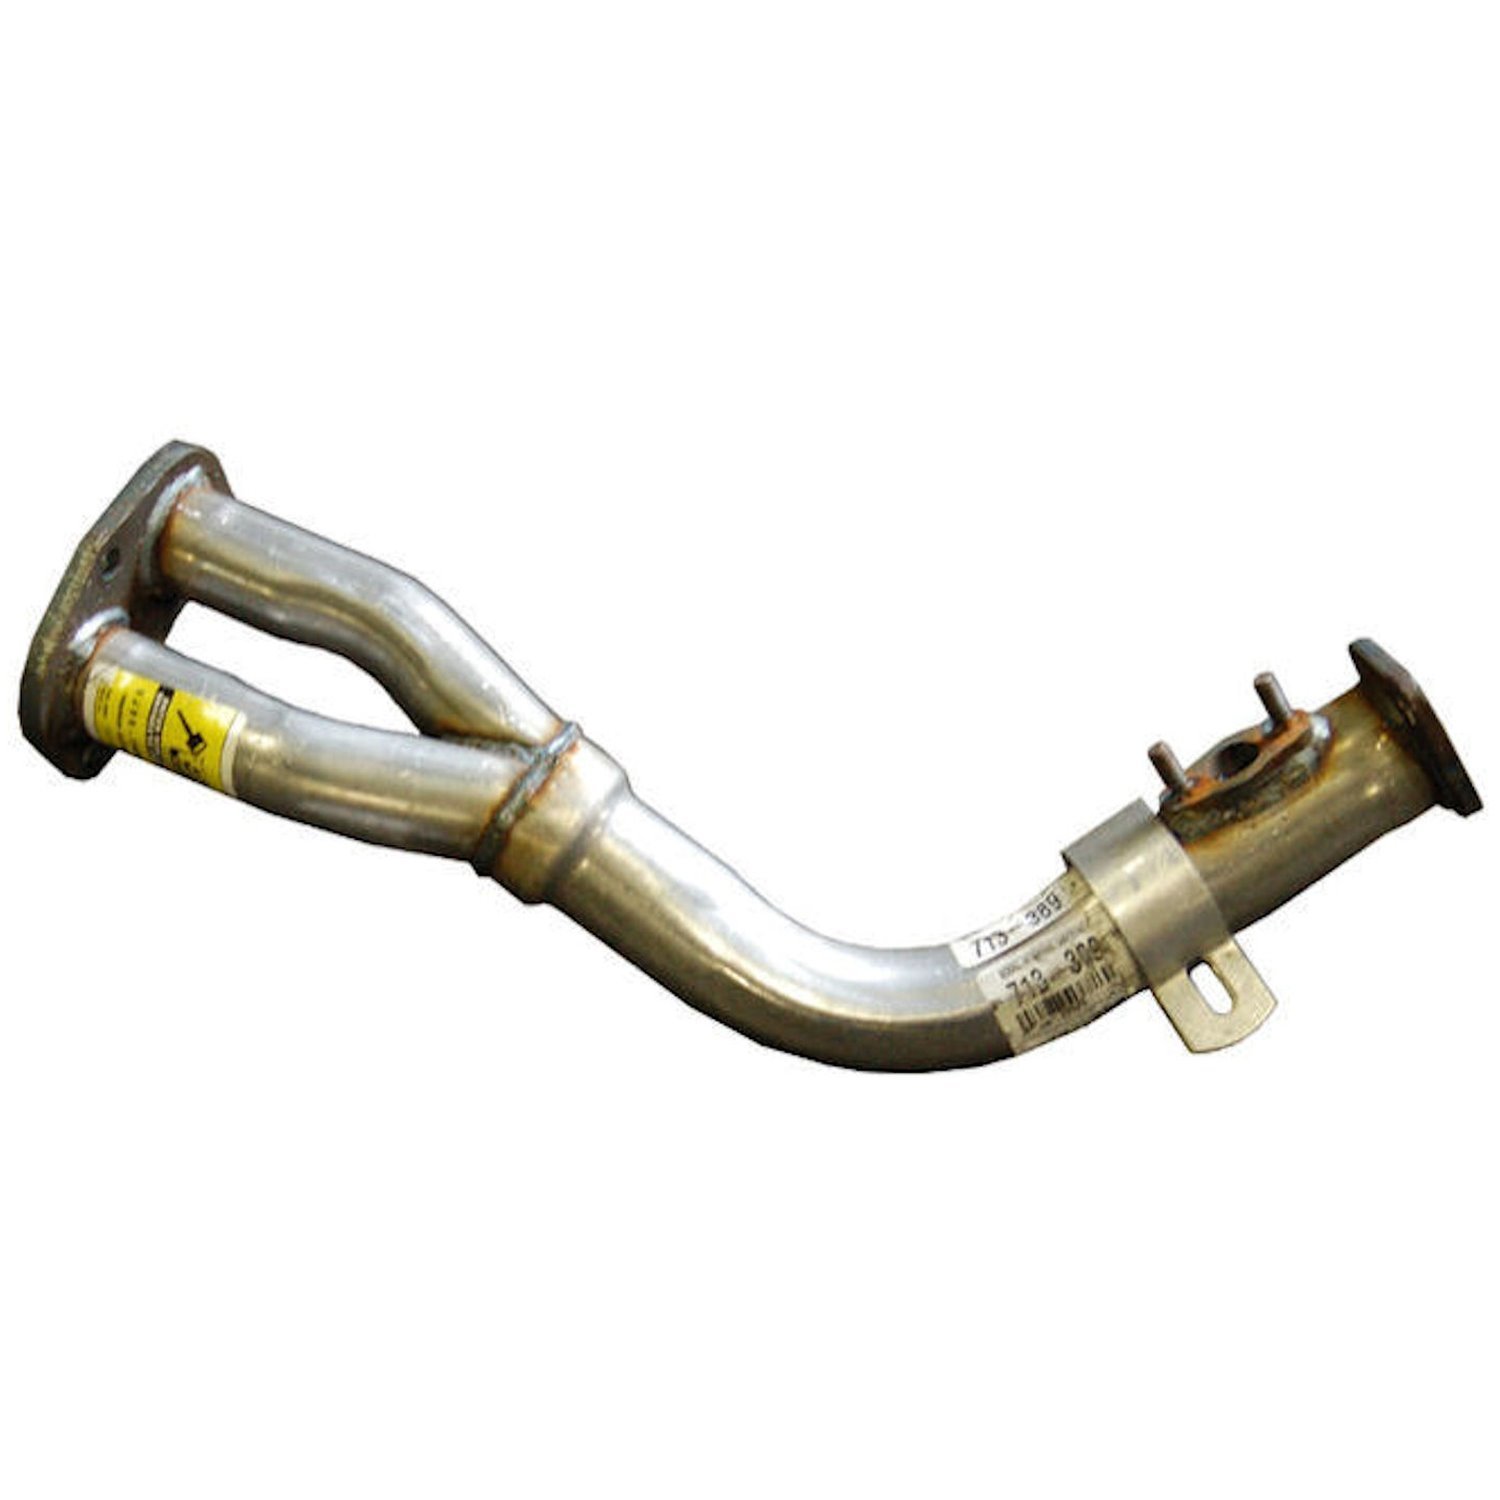 Direct-Fit Exhaust Intermediate Pipe, 1995-2000 Toyota Tacoma 2.4L